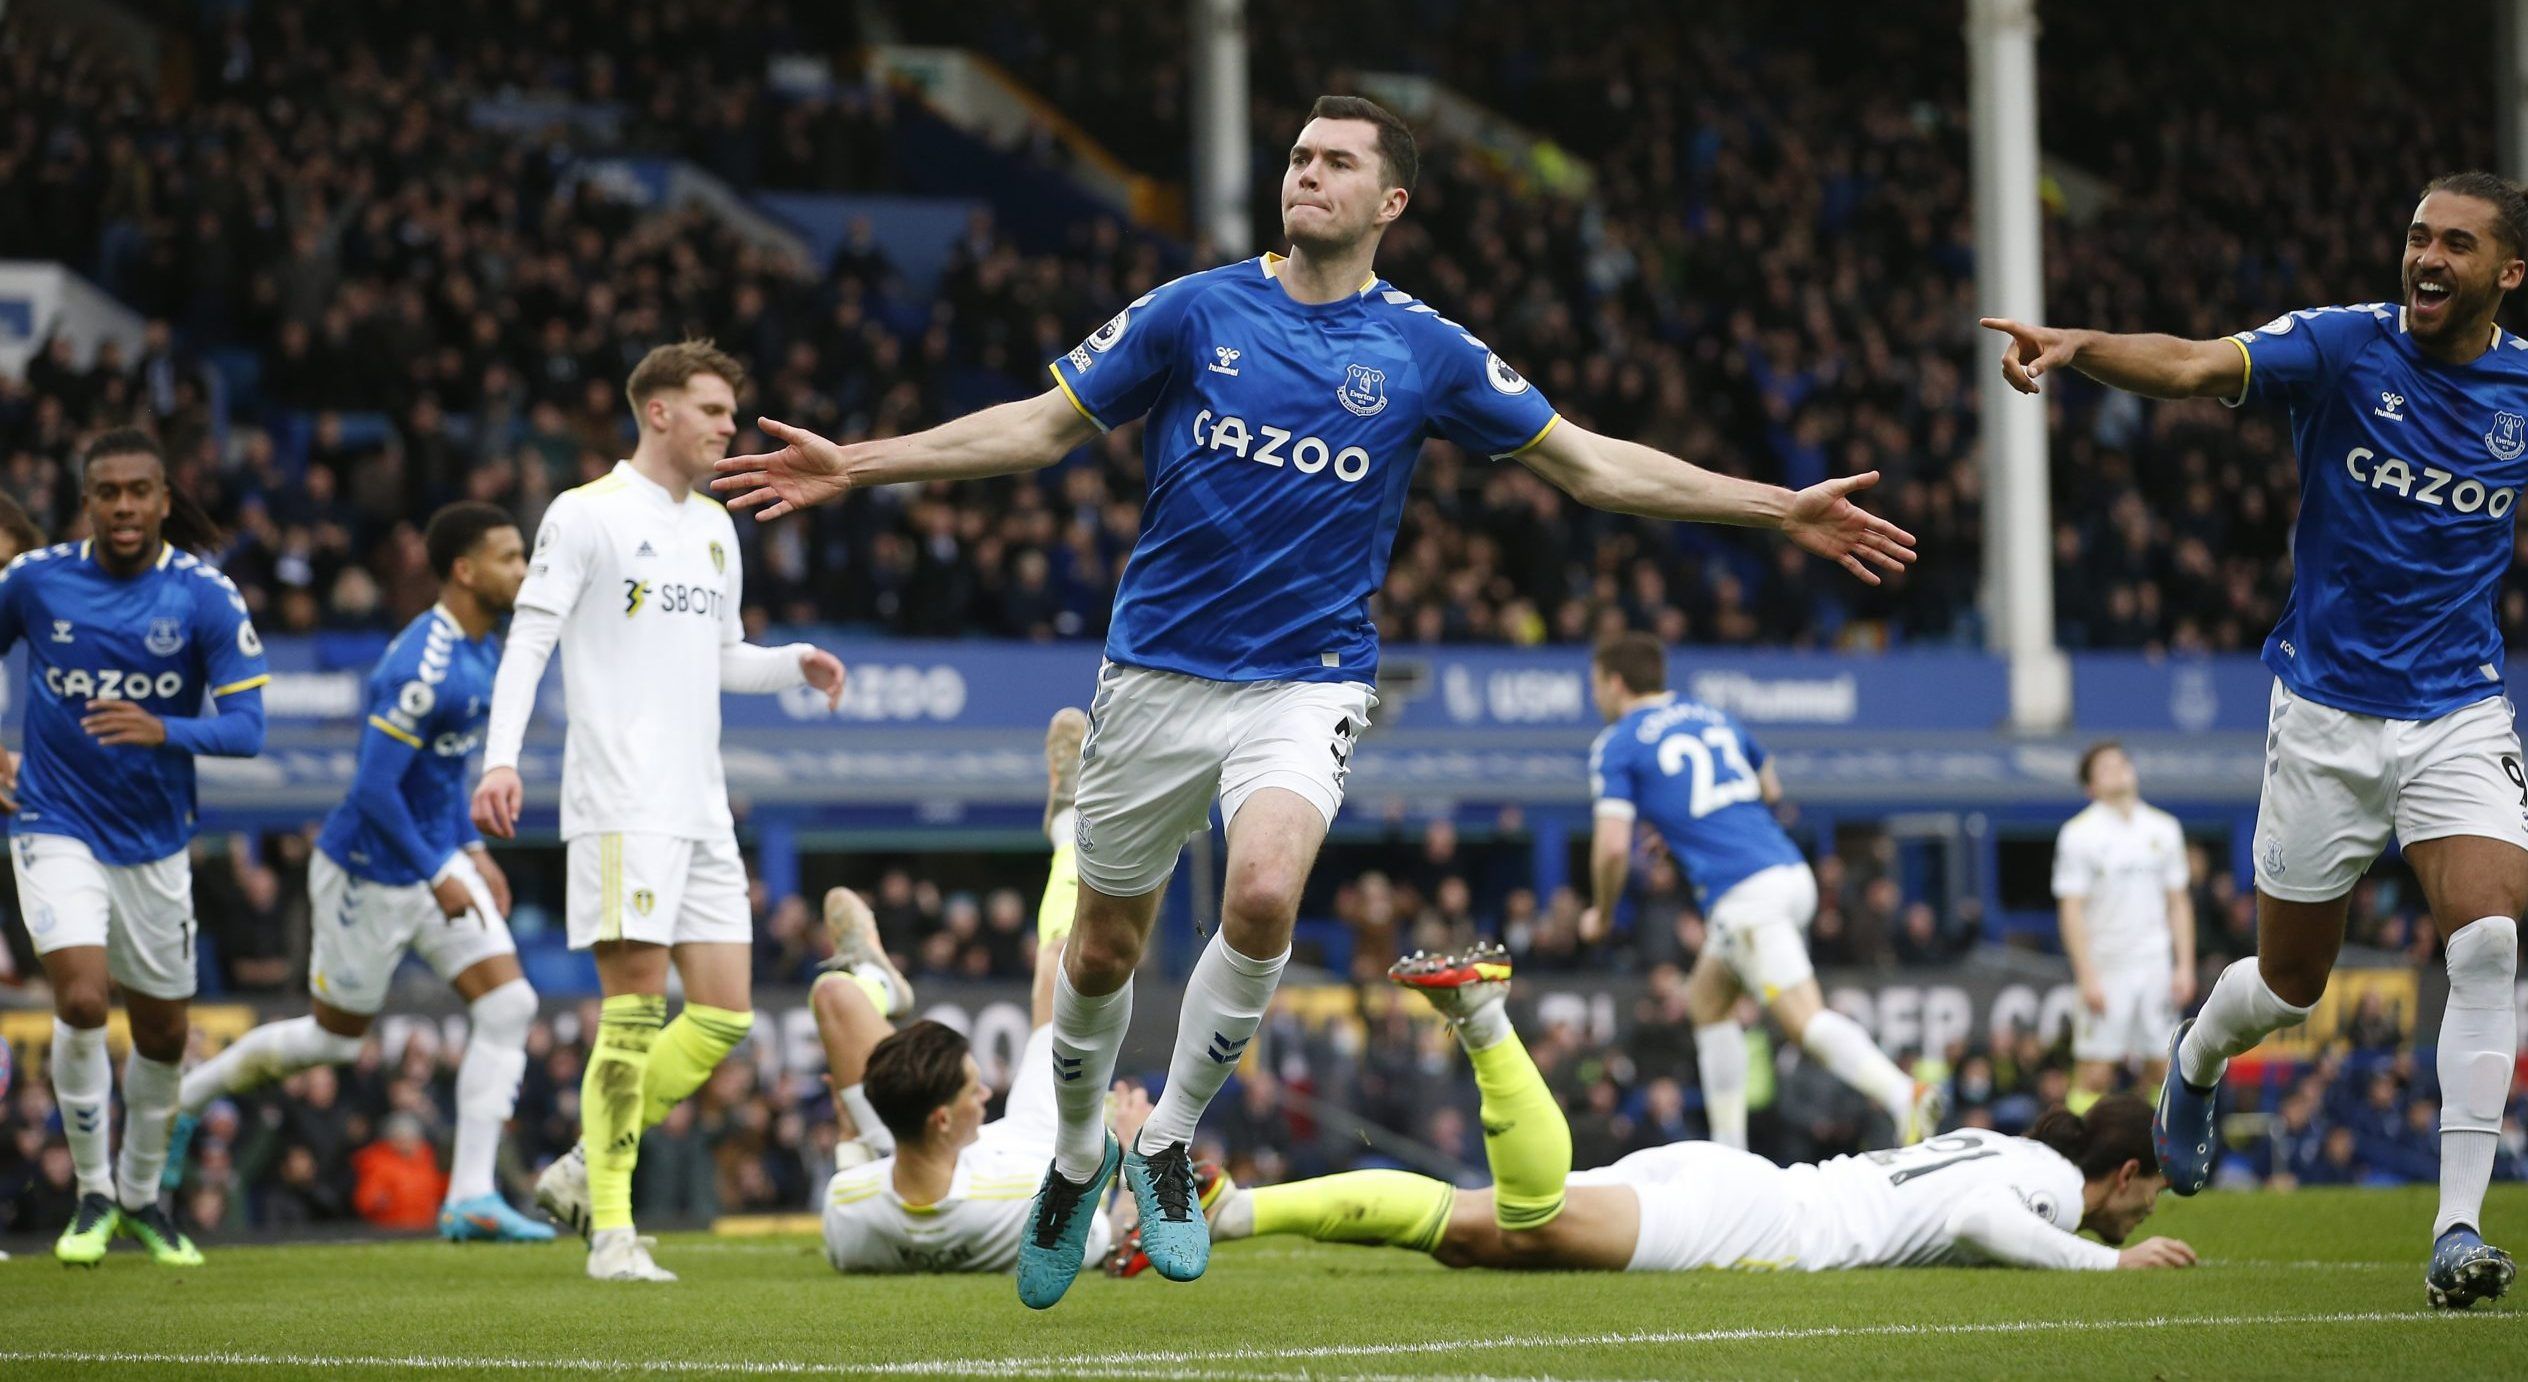 Soccer Football - Premier League - Everton v Leeds United - Goodison Park, Liverpool, Britain - February 12, 2022 Everton's Michael Keane celebrates scoring their second goal REUTERS/Craig Brough EDITORIAL USE ONLY. No use with unauthorized audio, video, data, fixture lists, club/league logos or 'live' services. Online in-match use limited to 75 images, no video emulation. No use in betting, games or single club /league/player publications.  Please contact your account representative for further